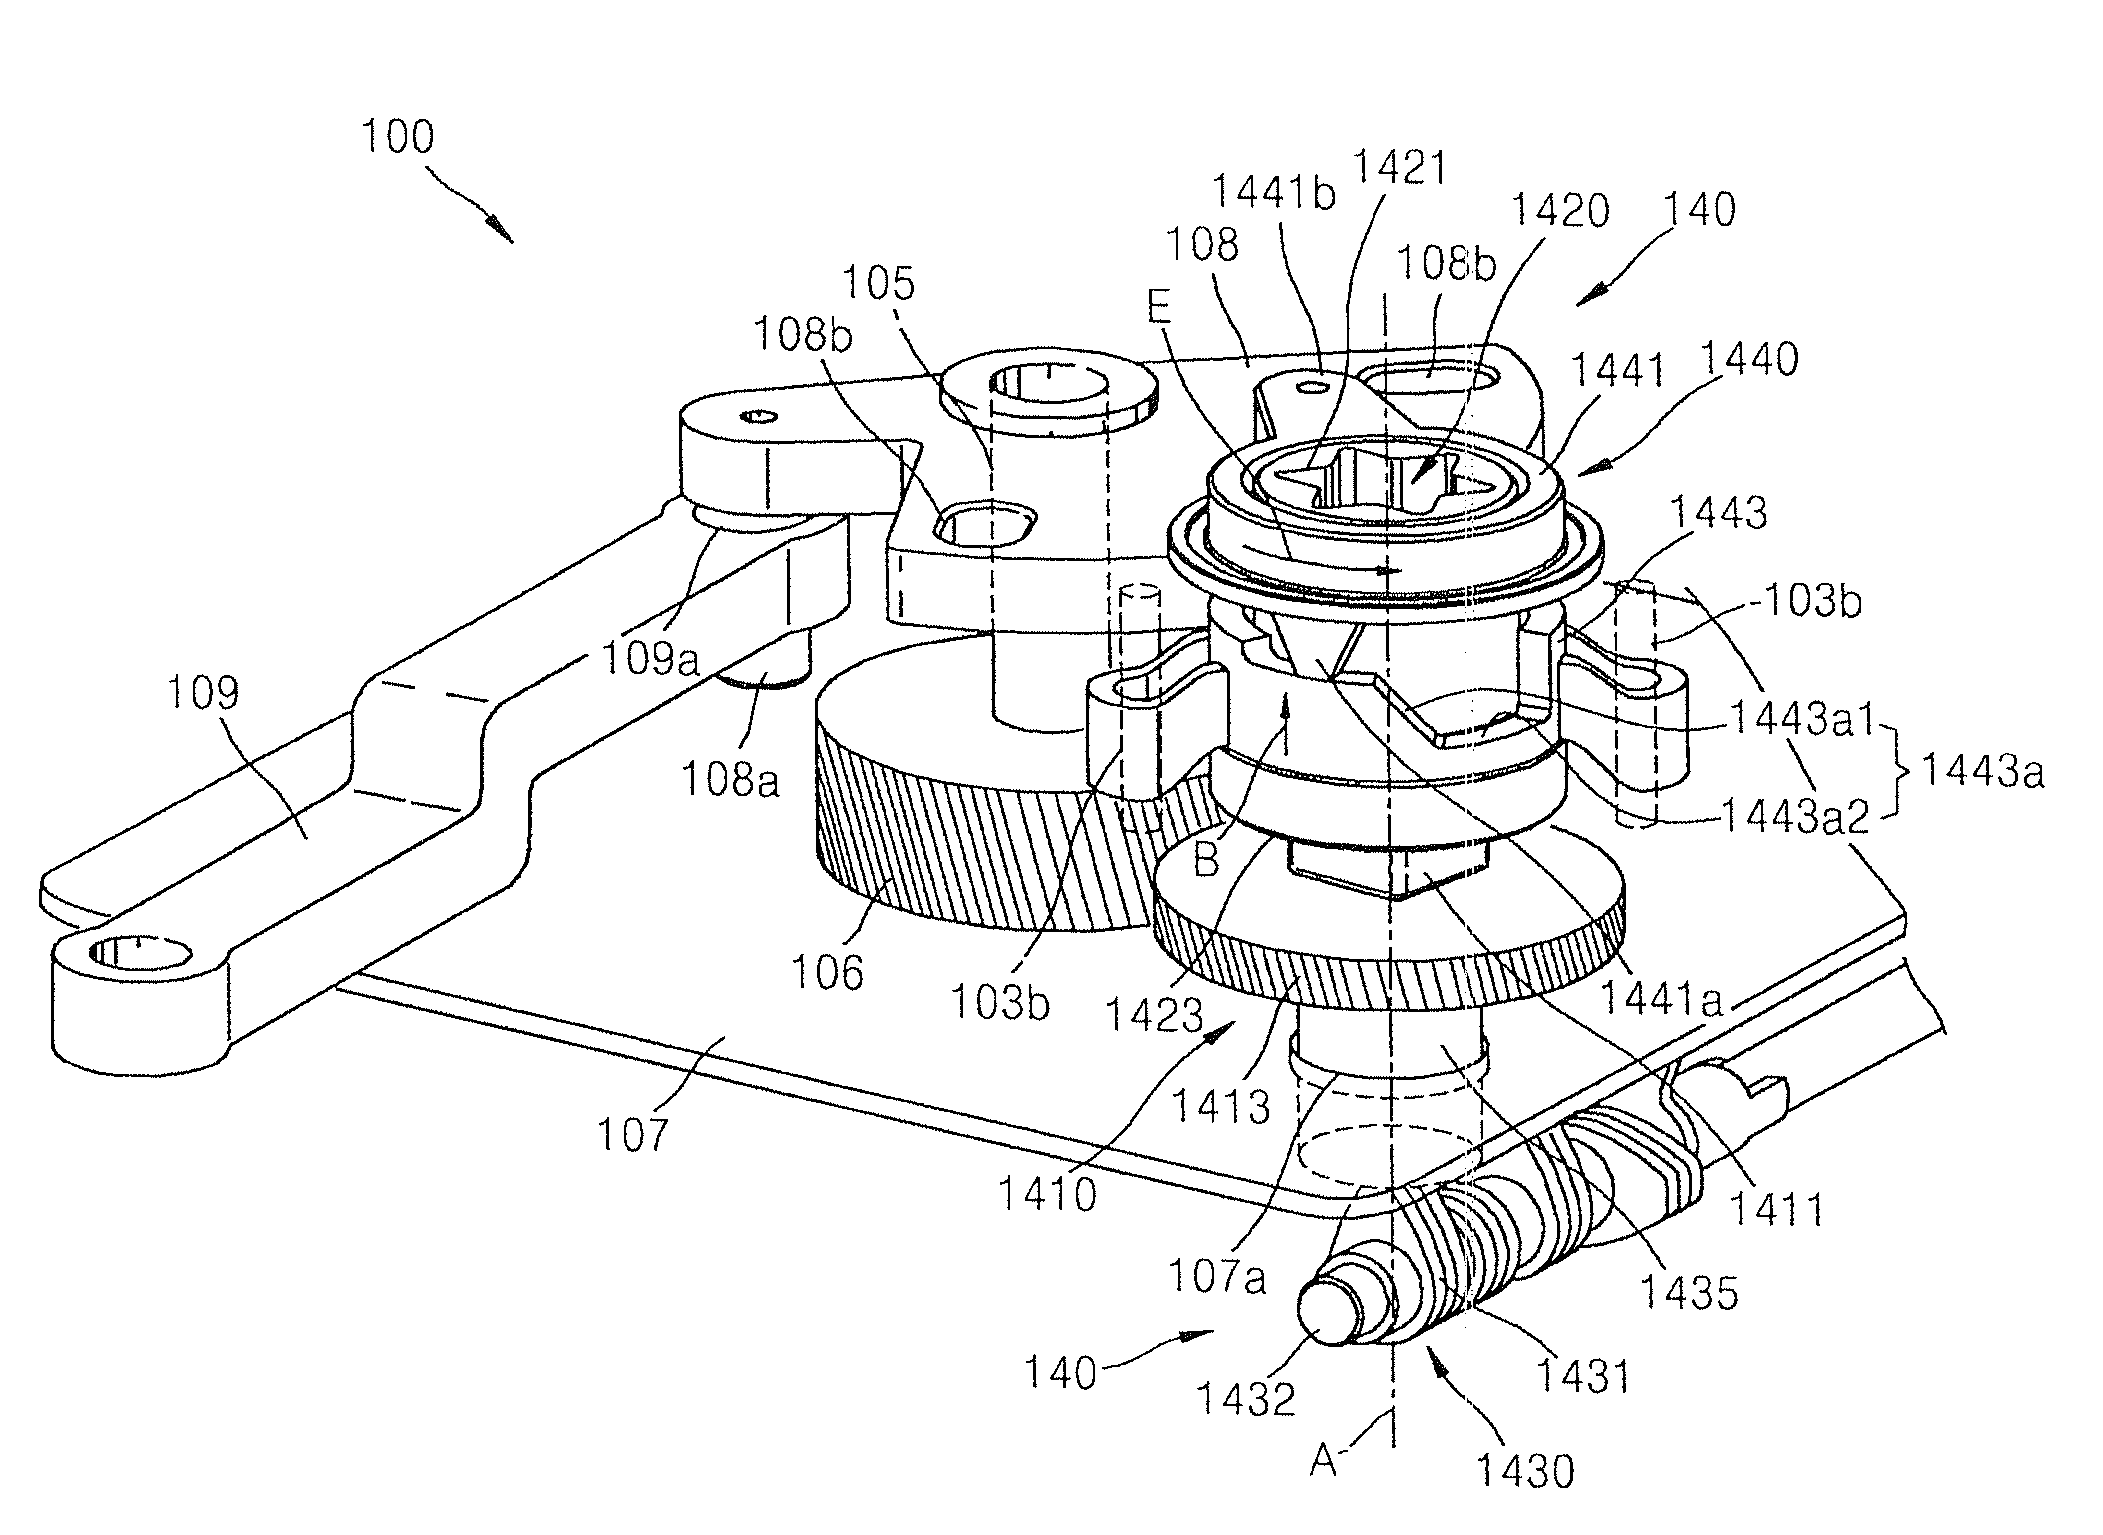 Image forming apparatus and power transmission unit thereof